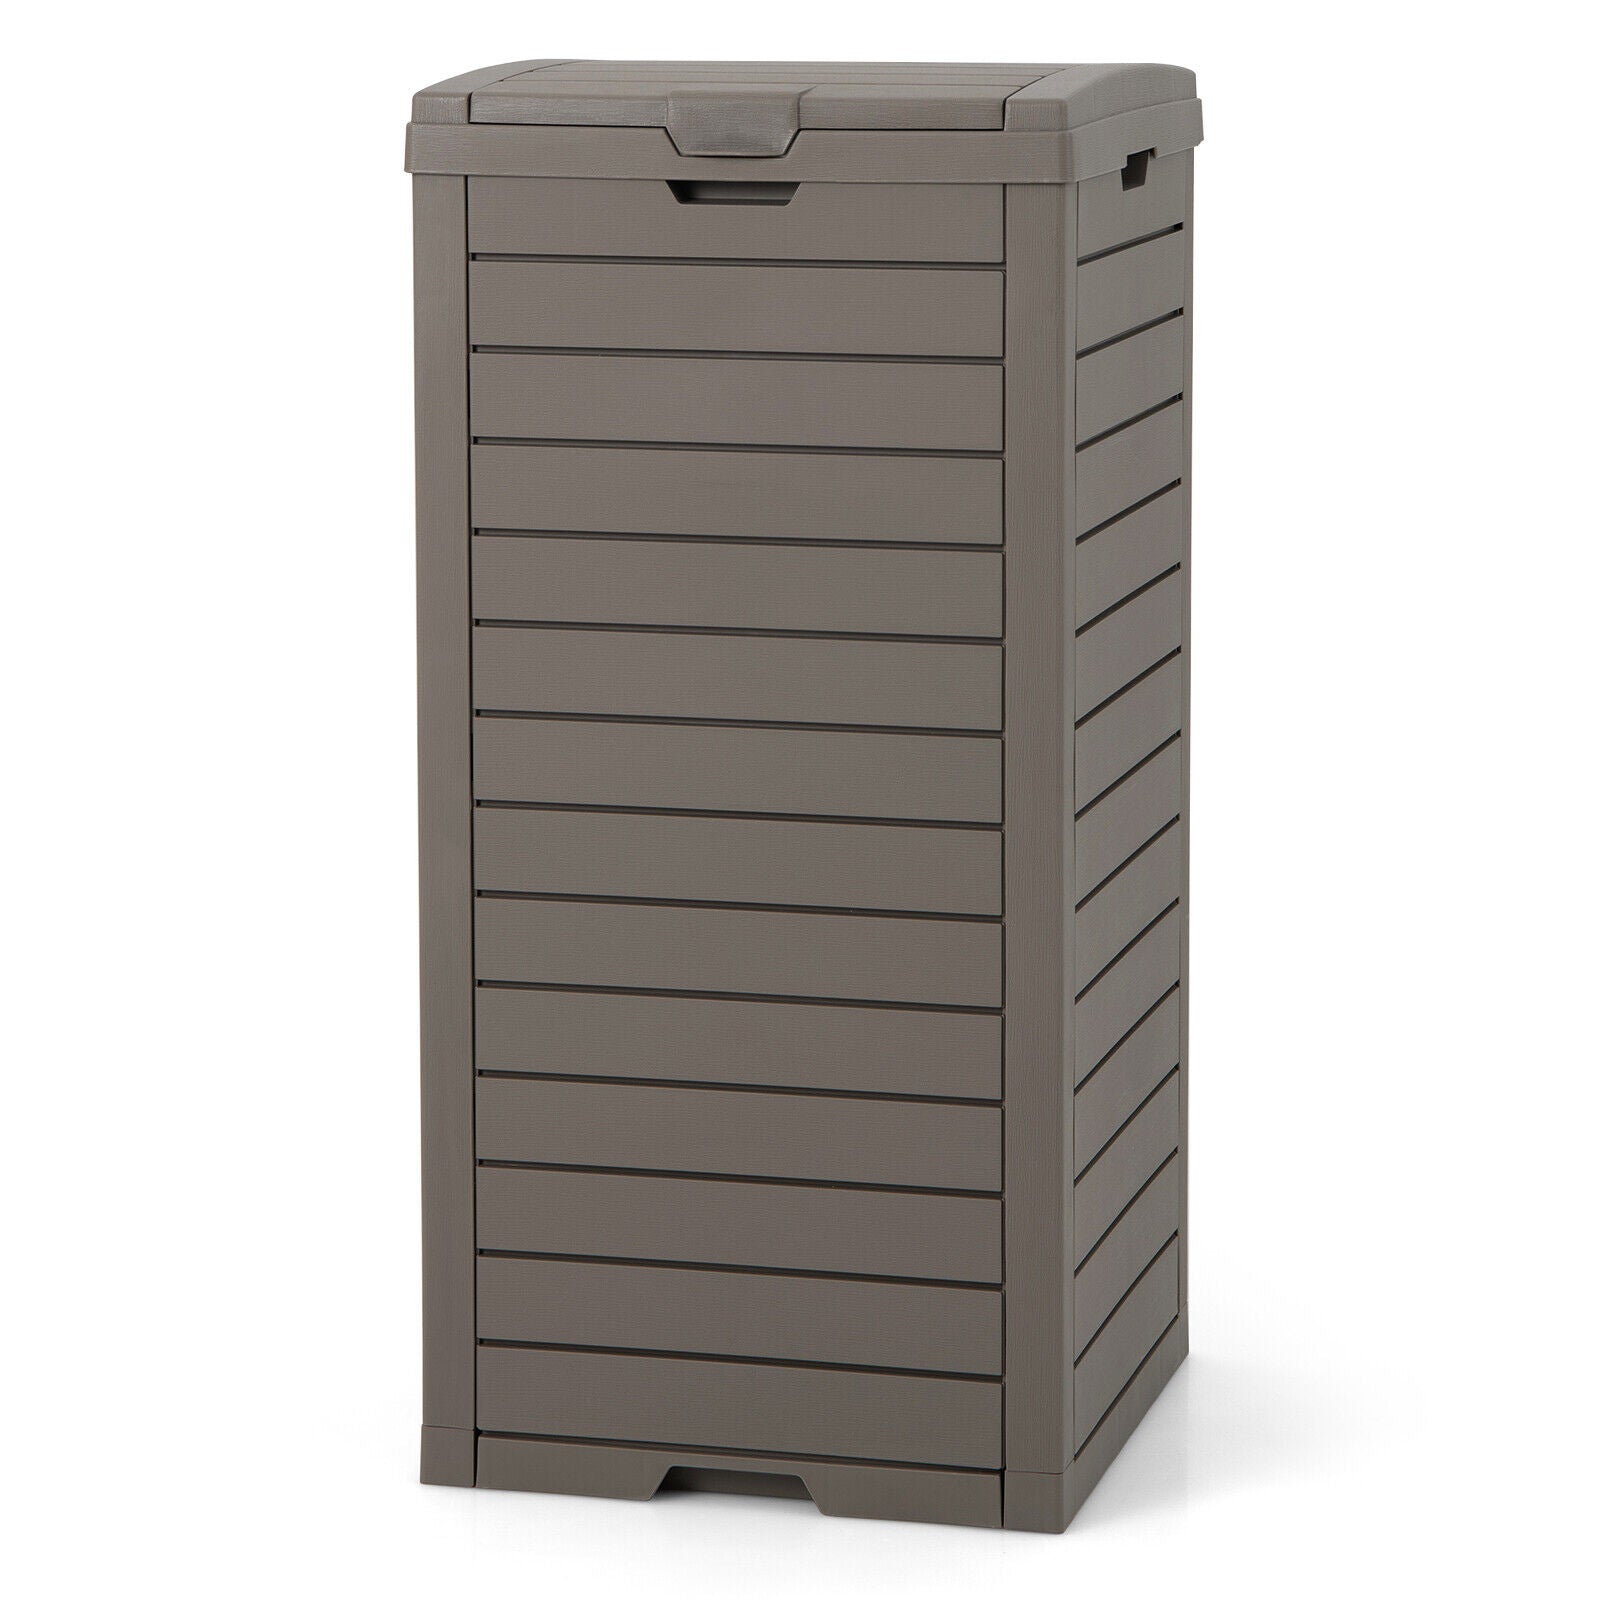 Trash Can with Dual Lid - 31 Gallon Outdoor Trashcan